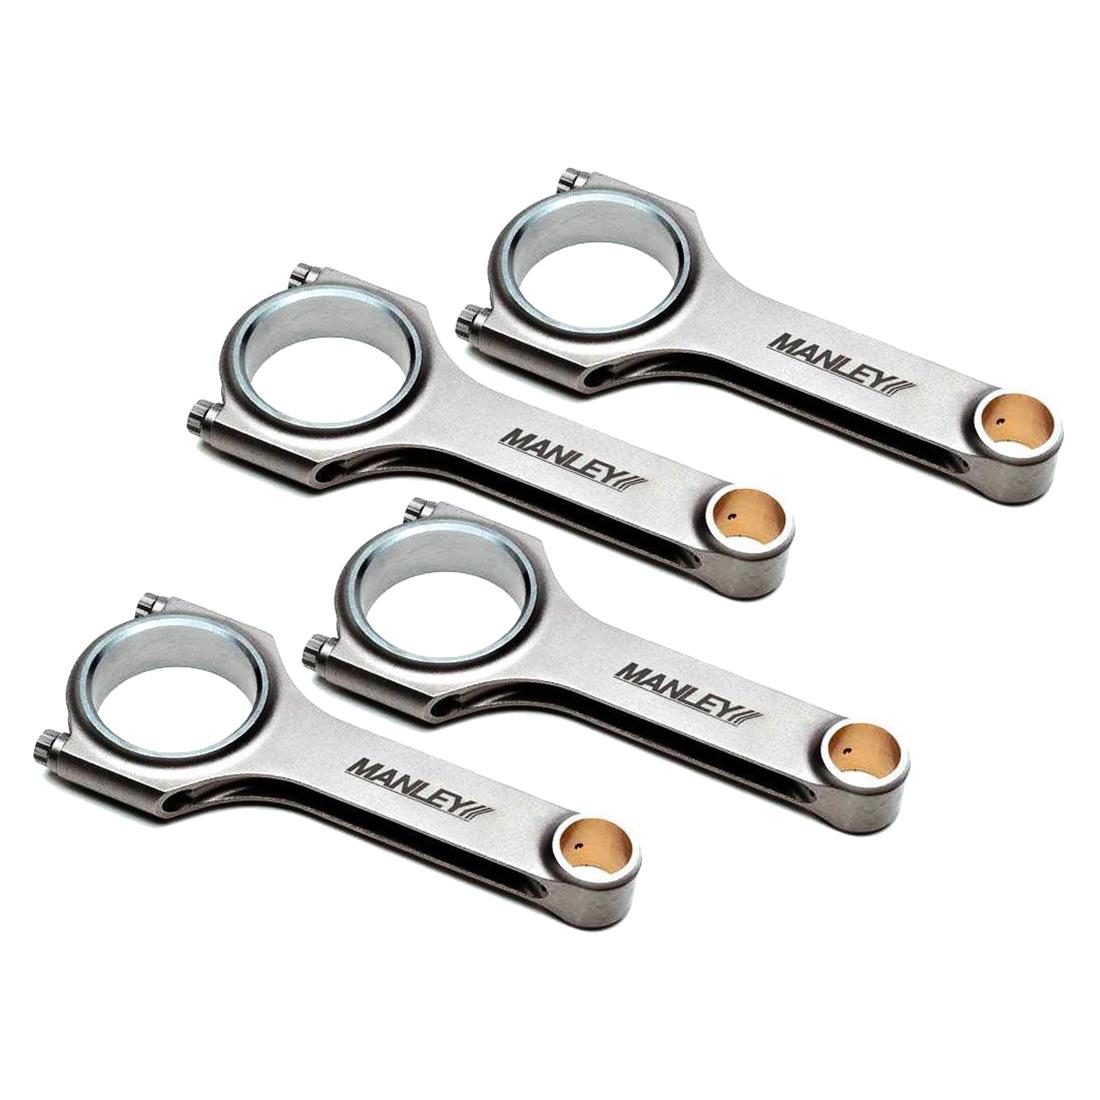 Manley 02+ Acura RSX 2.0 V-Tec (K20) Turbo Tuff Pro Series I-Beam Replacement Connecting Rod Set